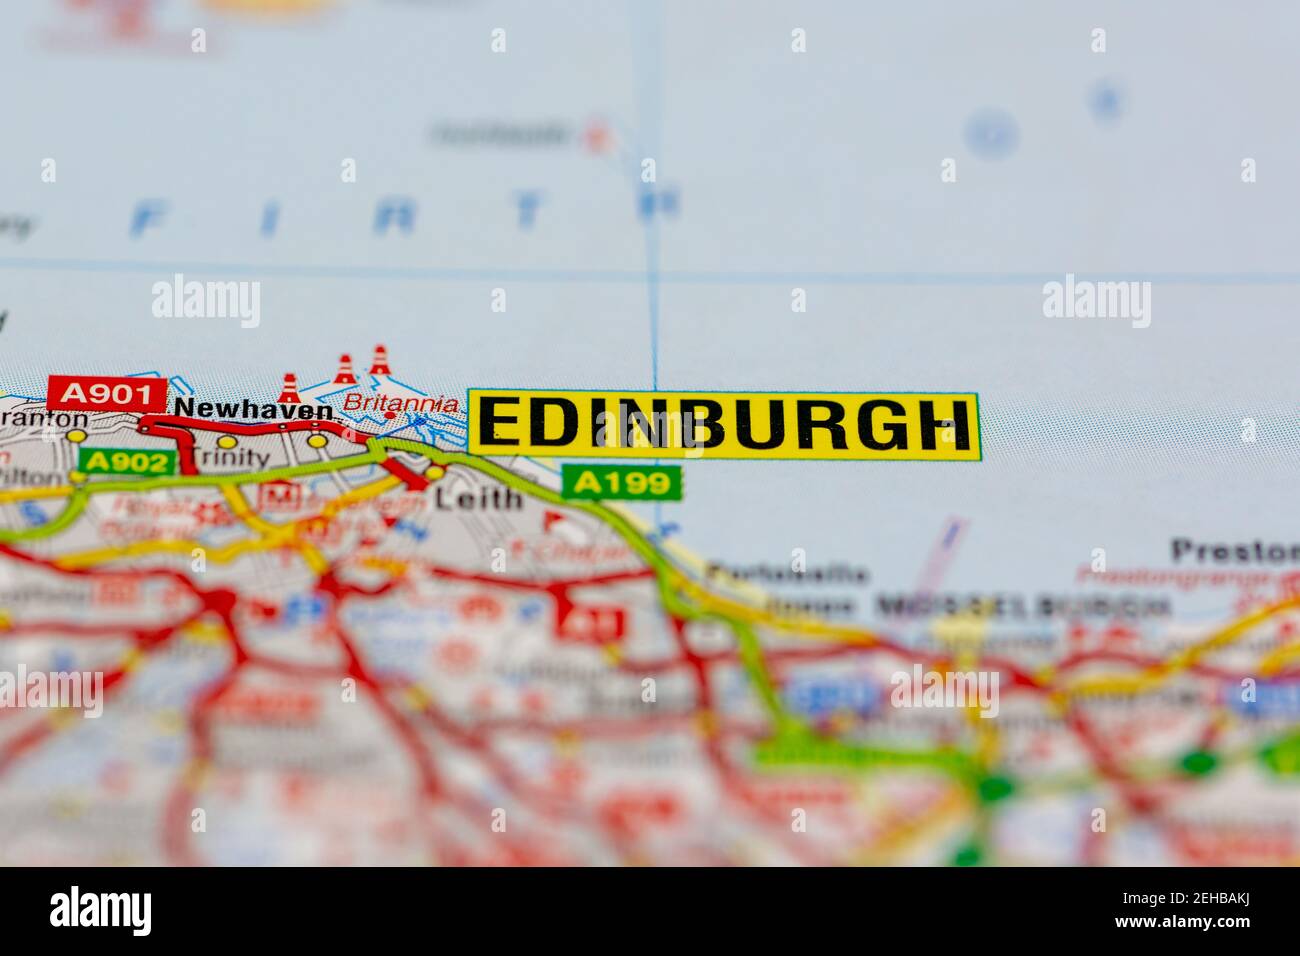 Edinburgh and surrounding areas shown on a road map or Geography map Stock Photo